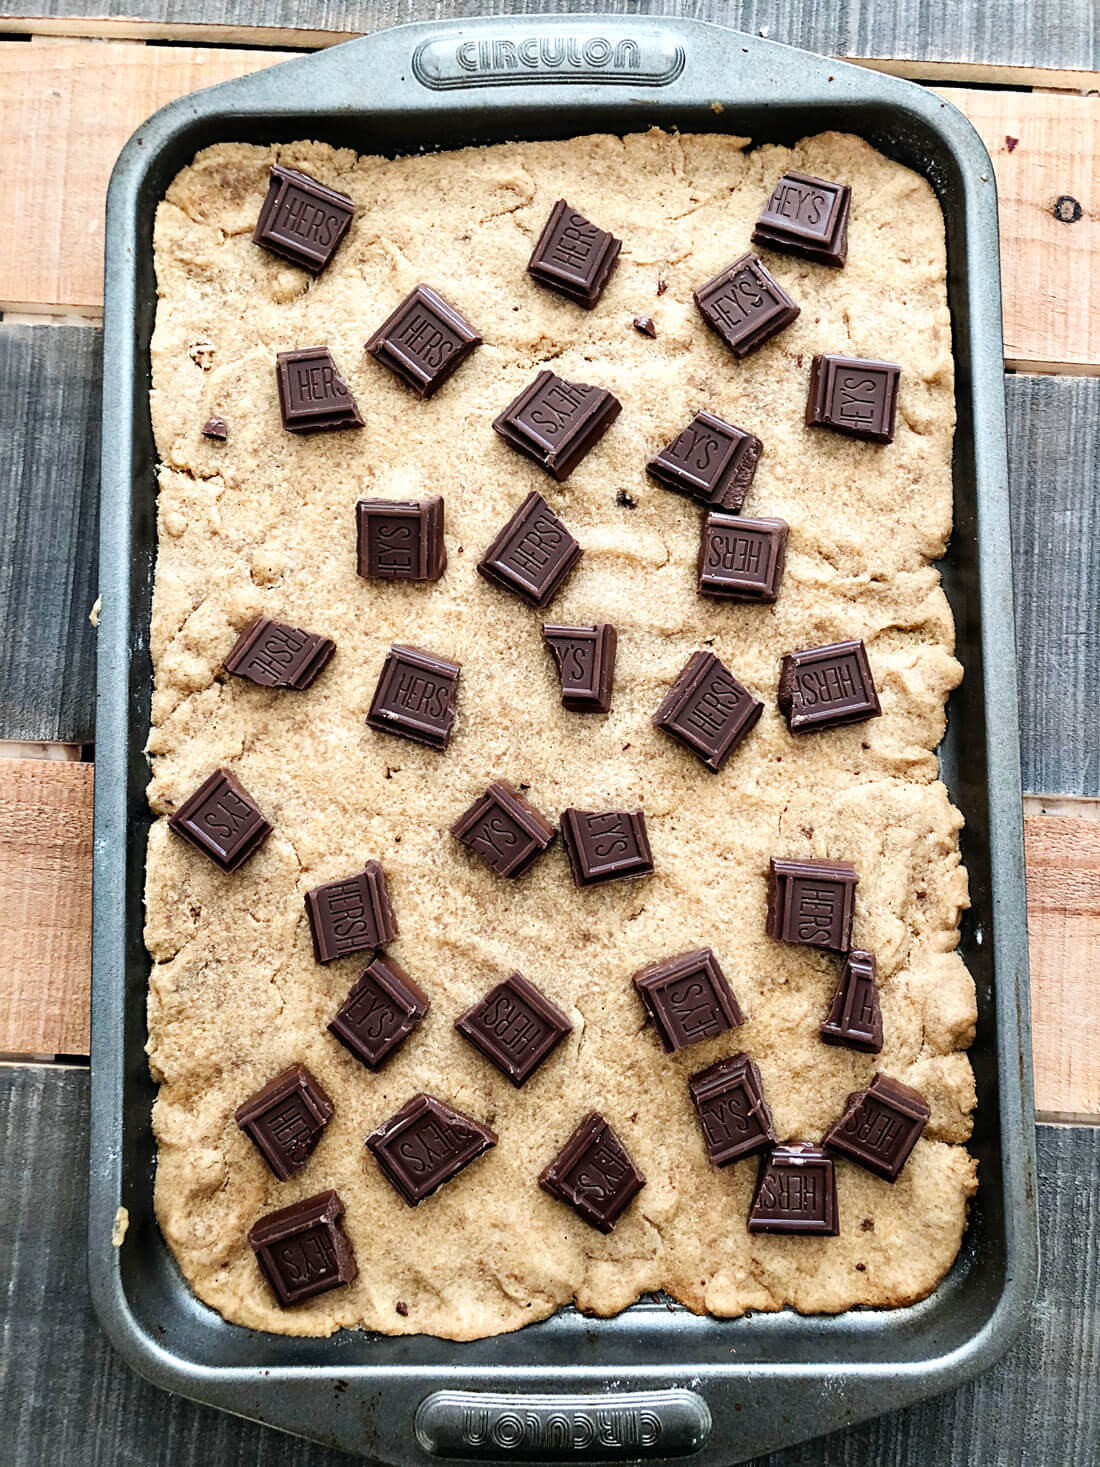 After baking the cookie on a cookie sheet, add broken up Hershey bars on top. 